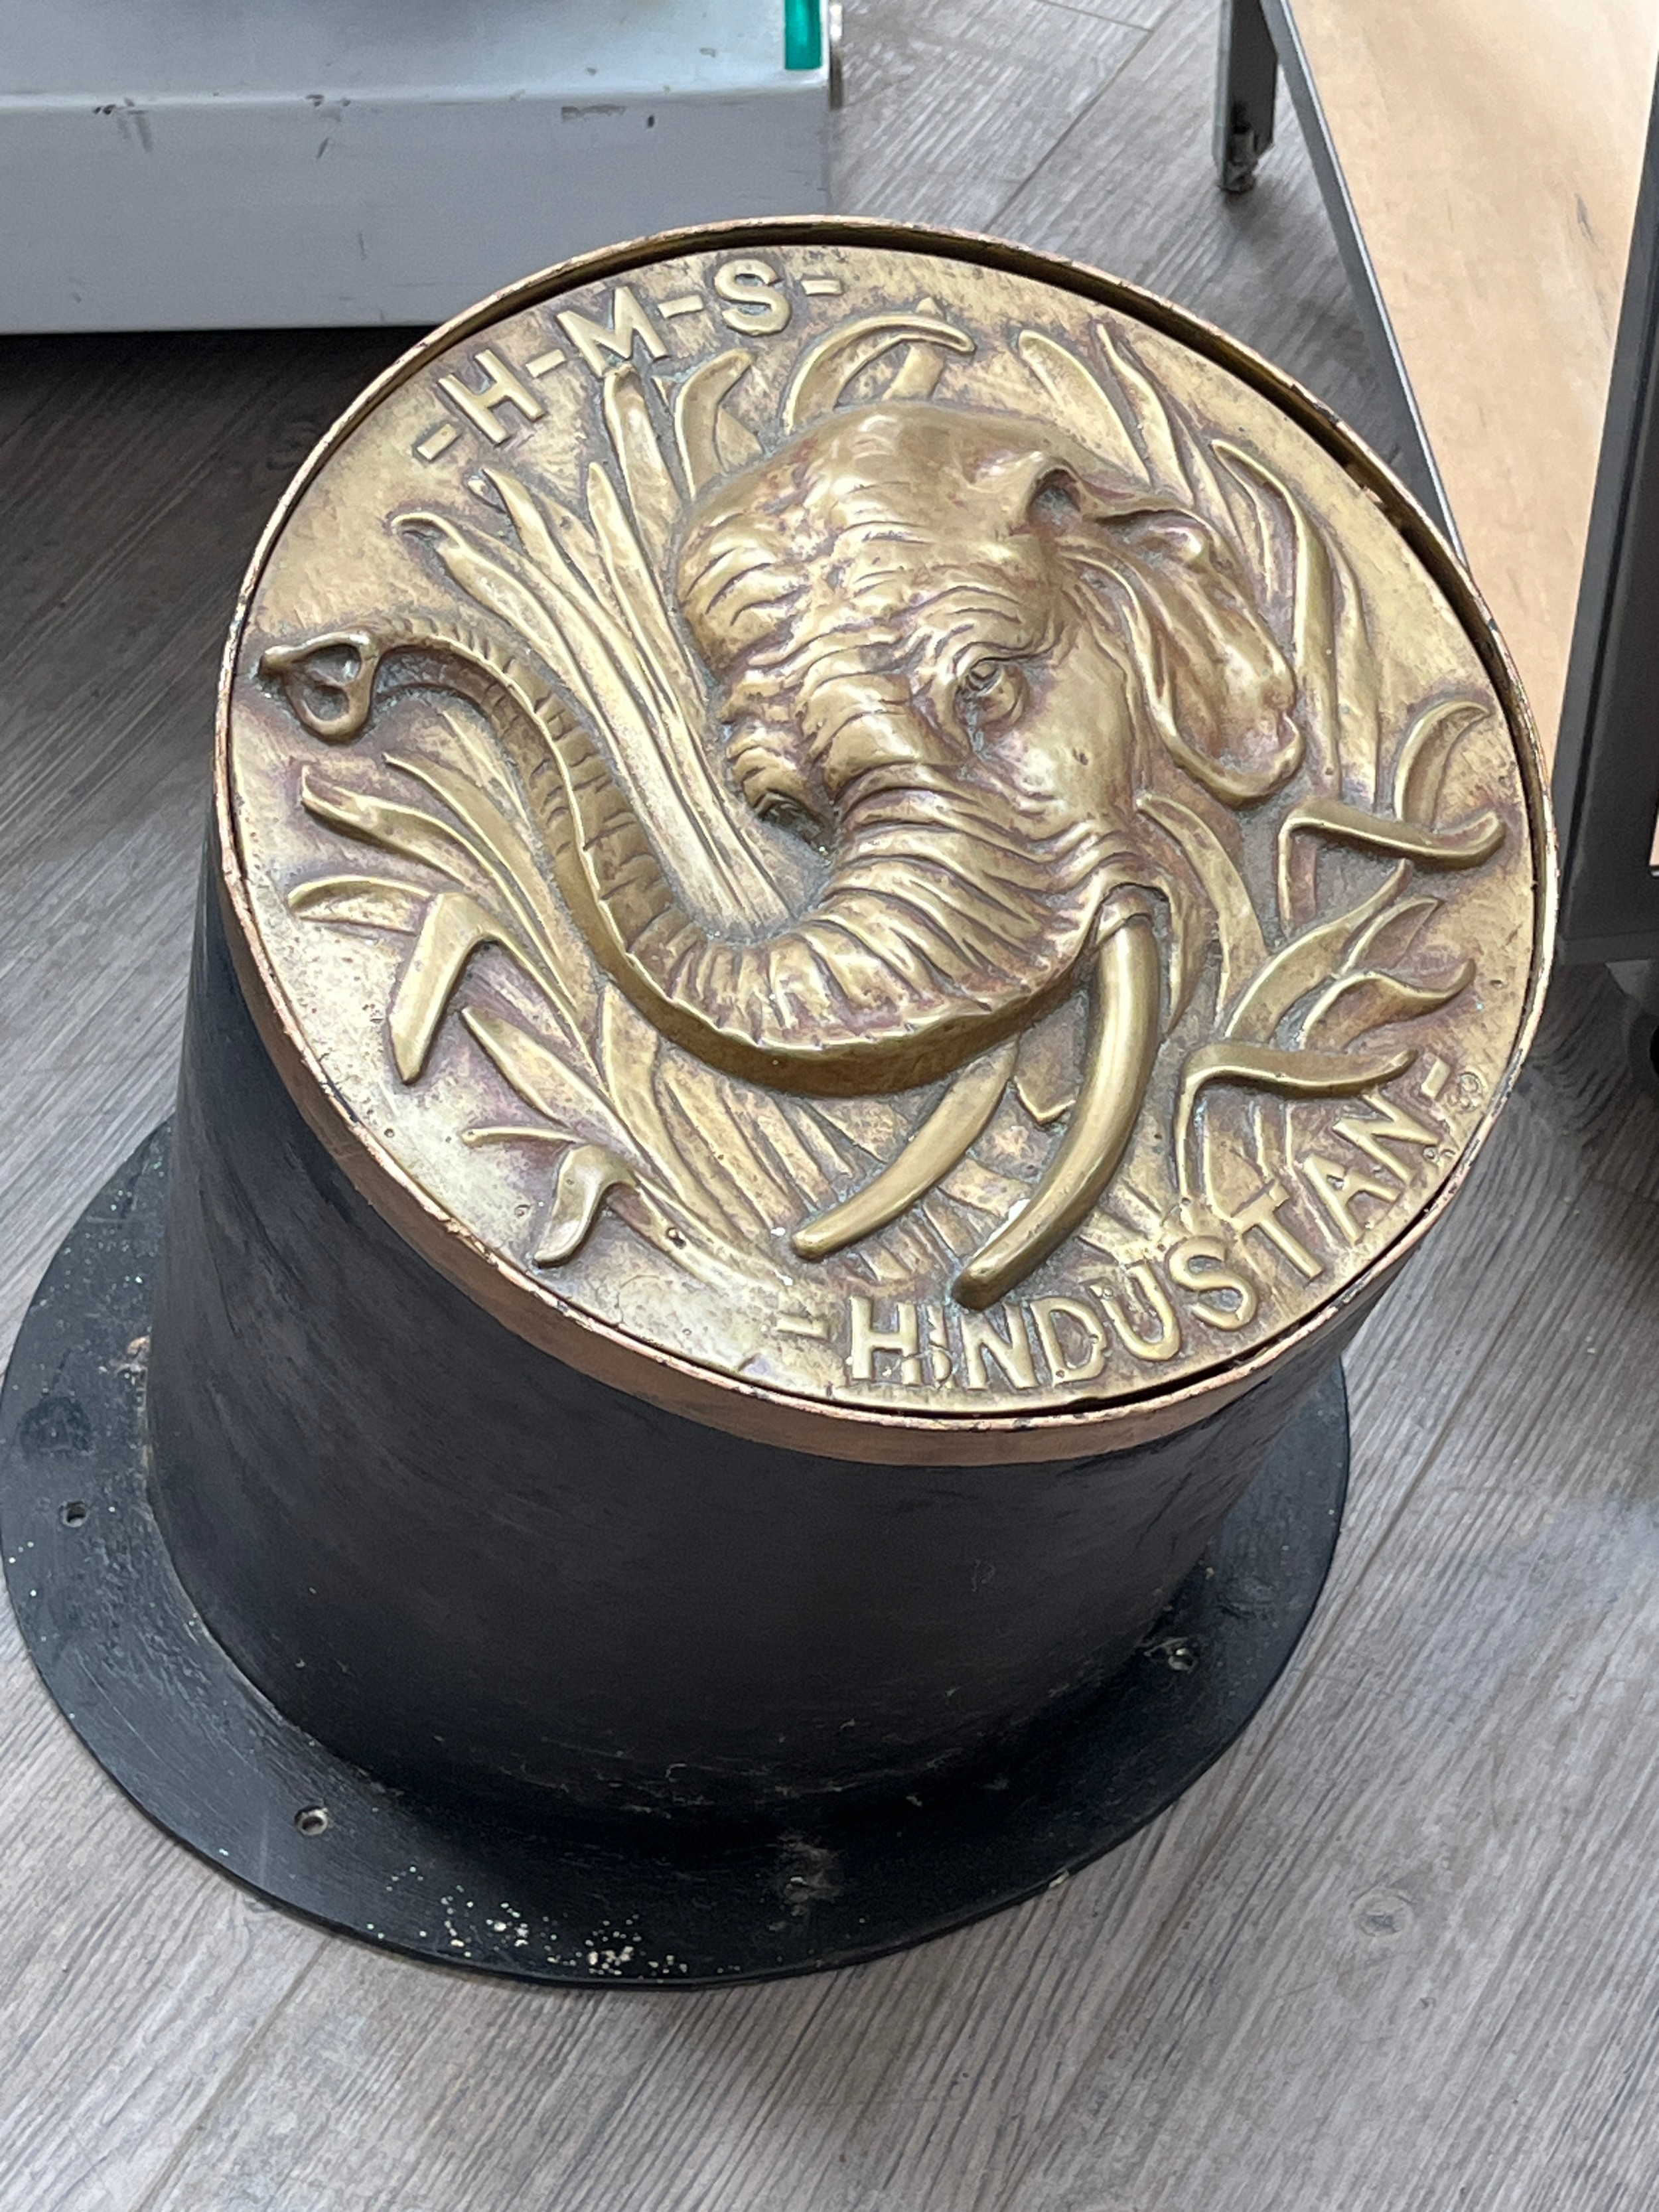 An HMS HINDUSTAN gun tompion/tampion, cast brass with design of elephant, upon a cylindrical base